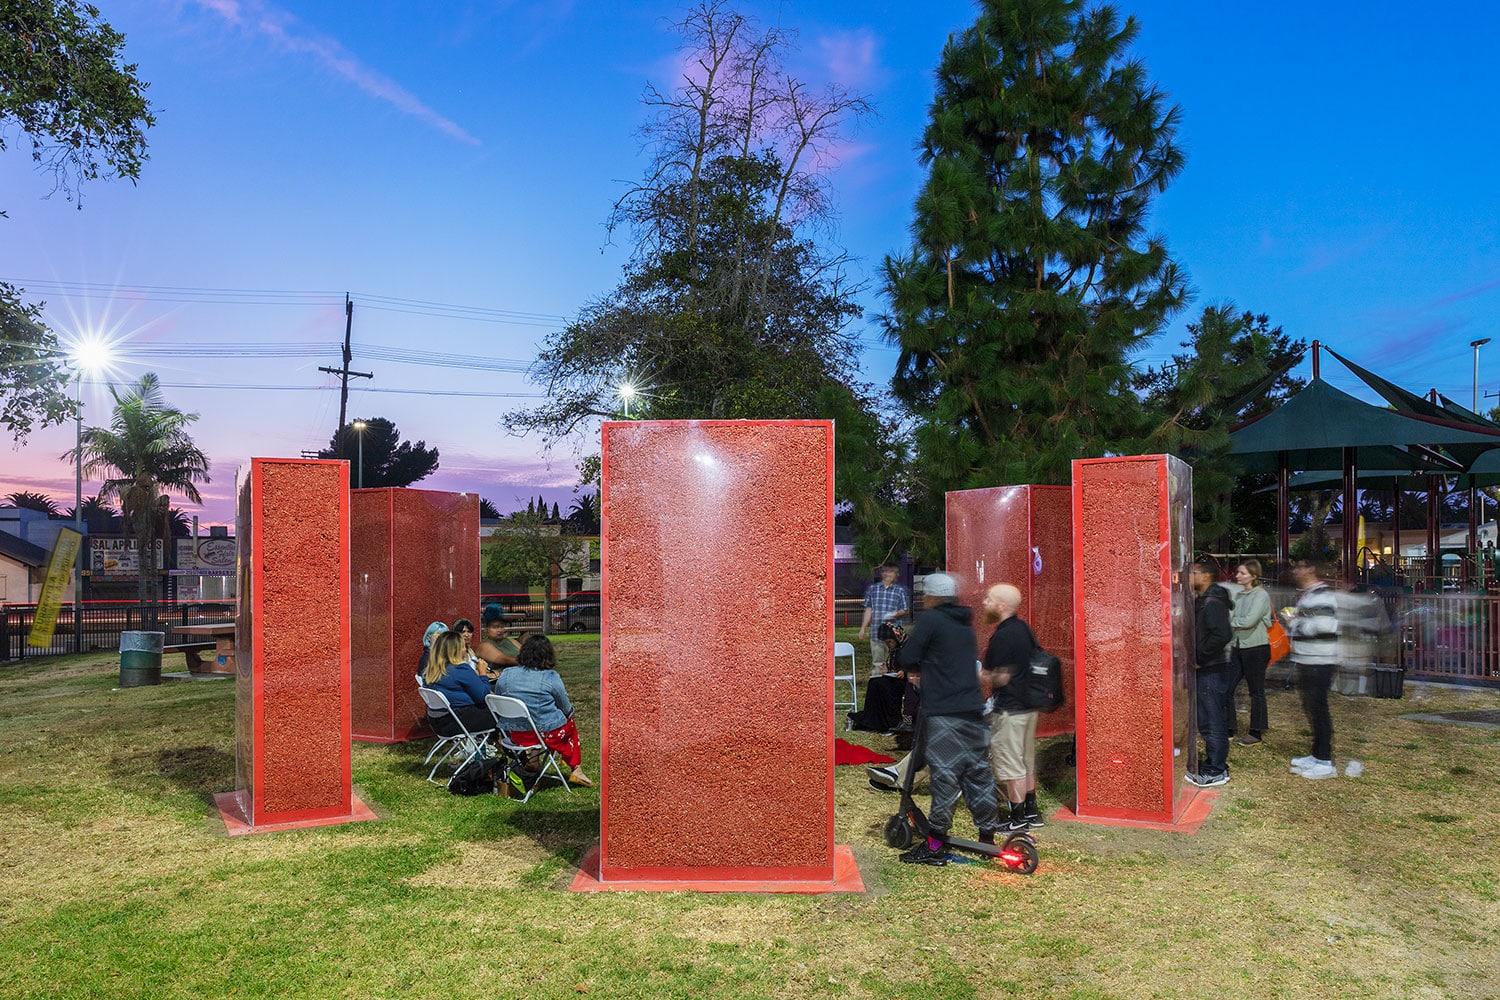 People sit and observe array of glass structures filled with Hot Cheetos arranged in circle